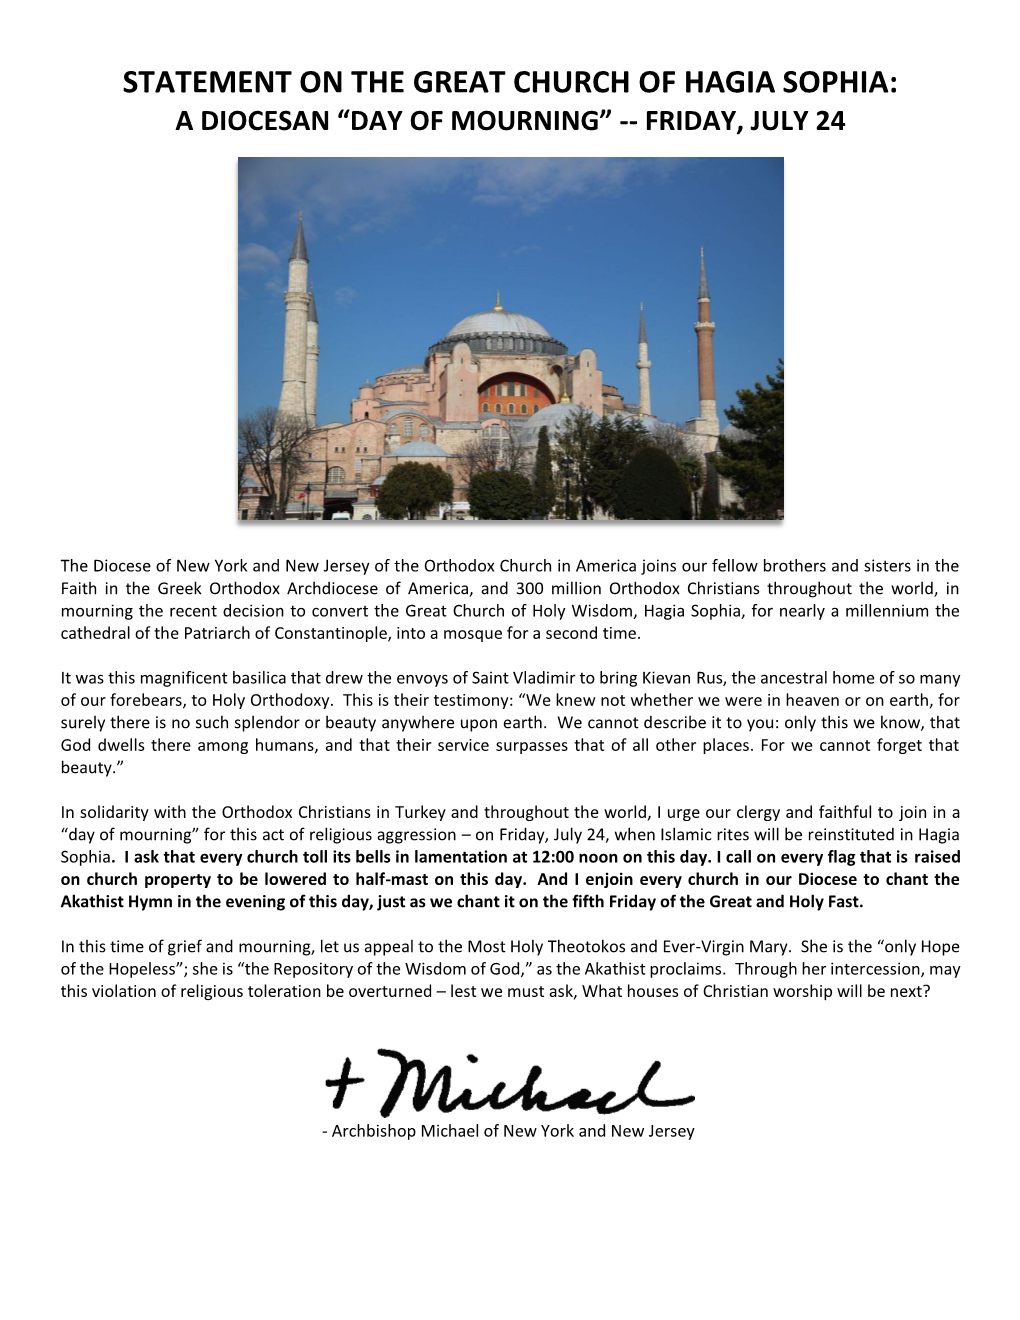 Statement on the Great Church of Hagia Sophia: a Diocesan “Day of Mourning” -- Friday, July 24